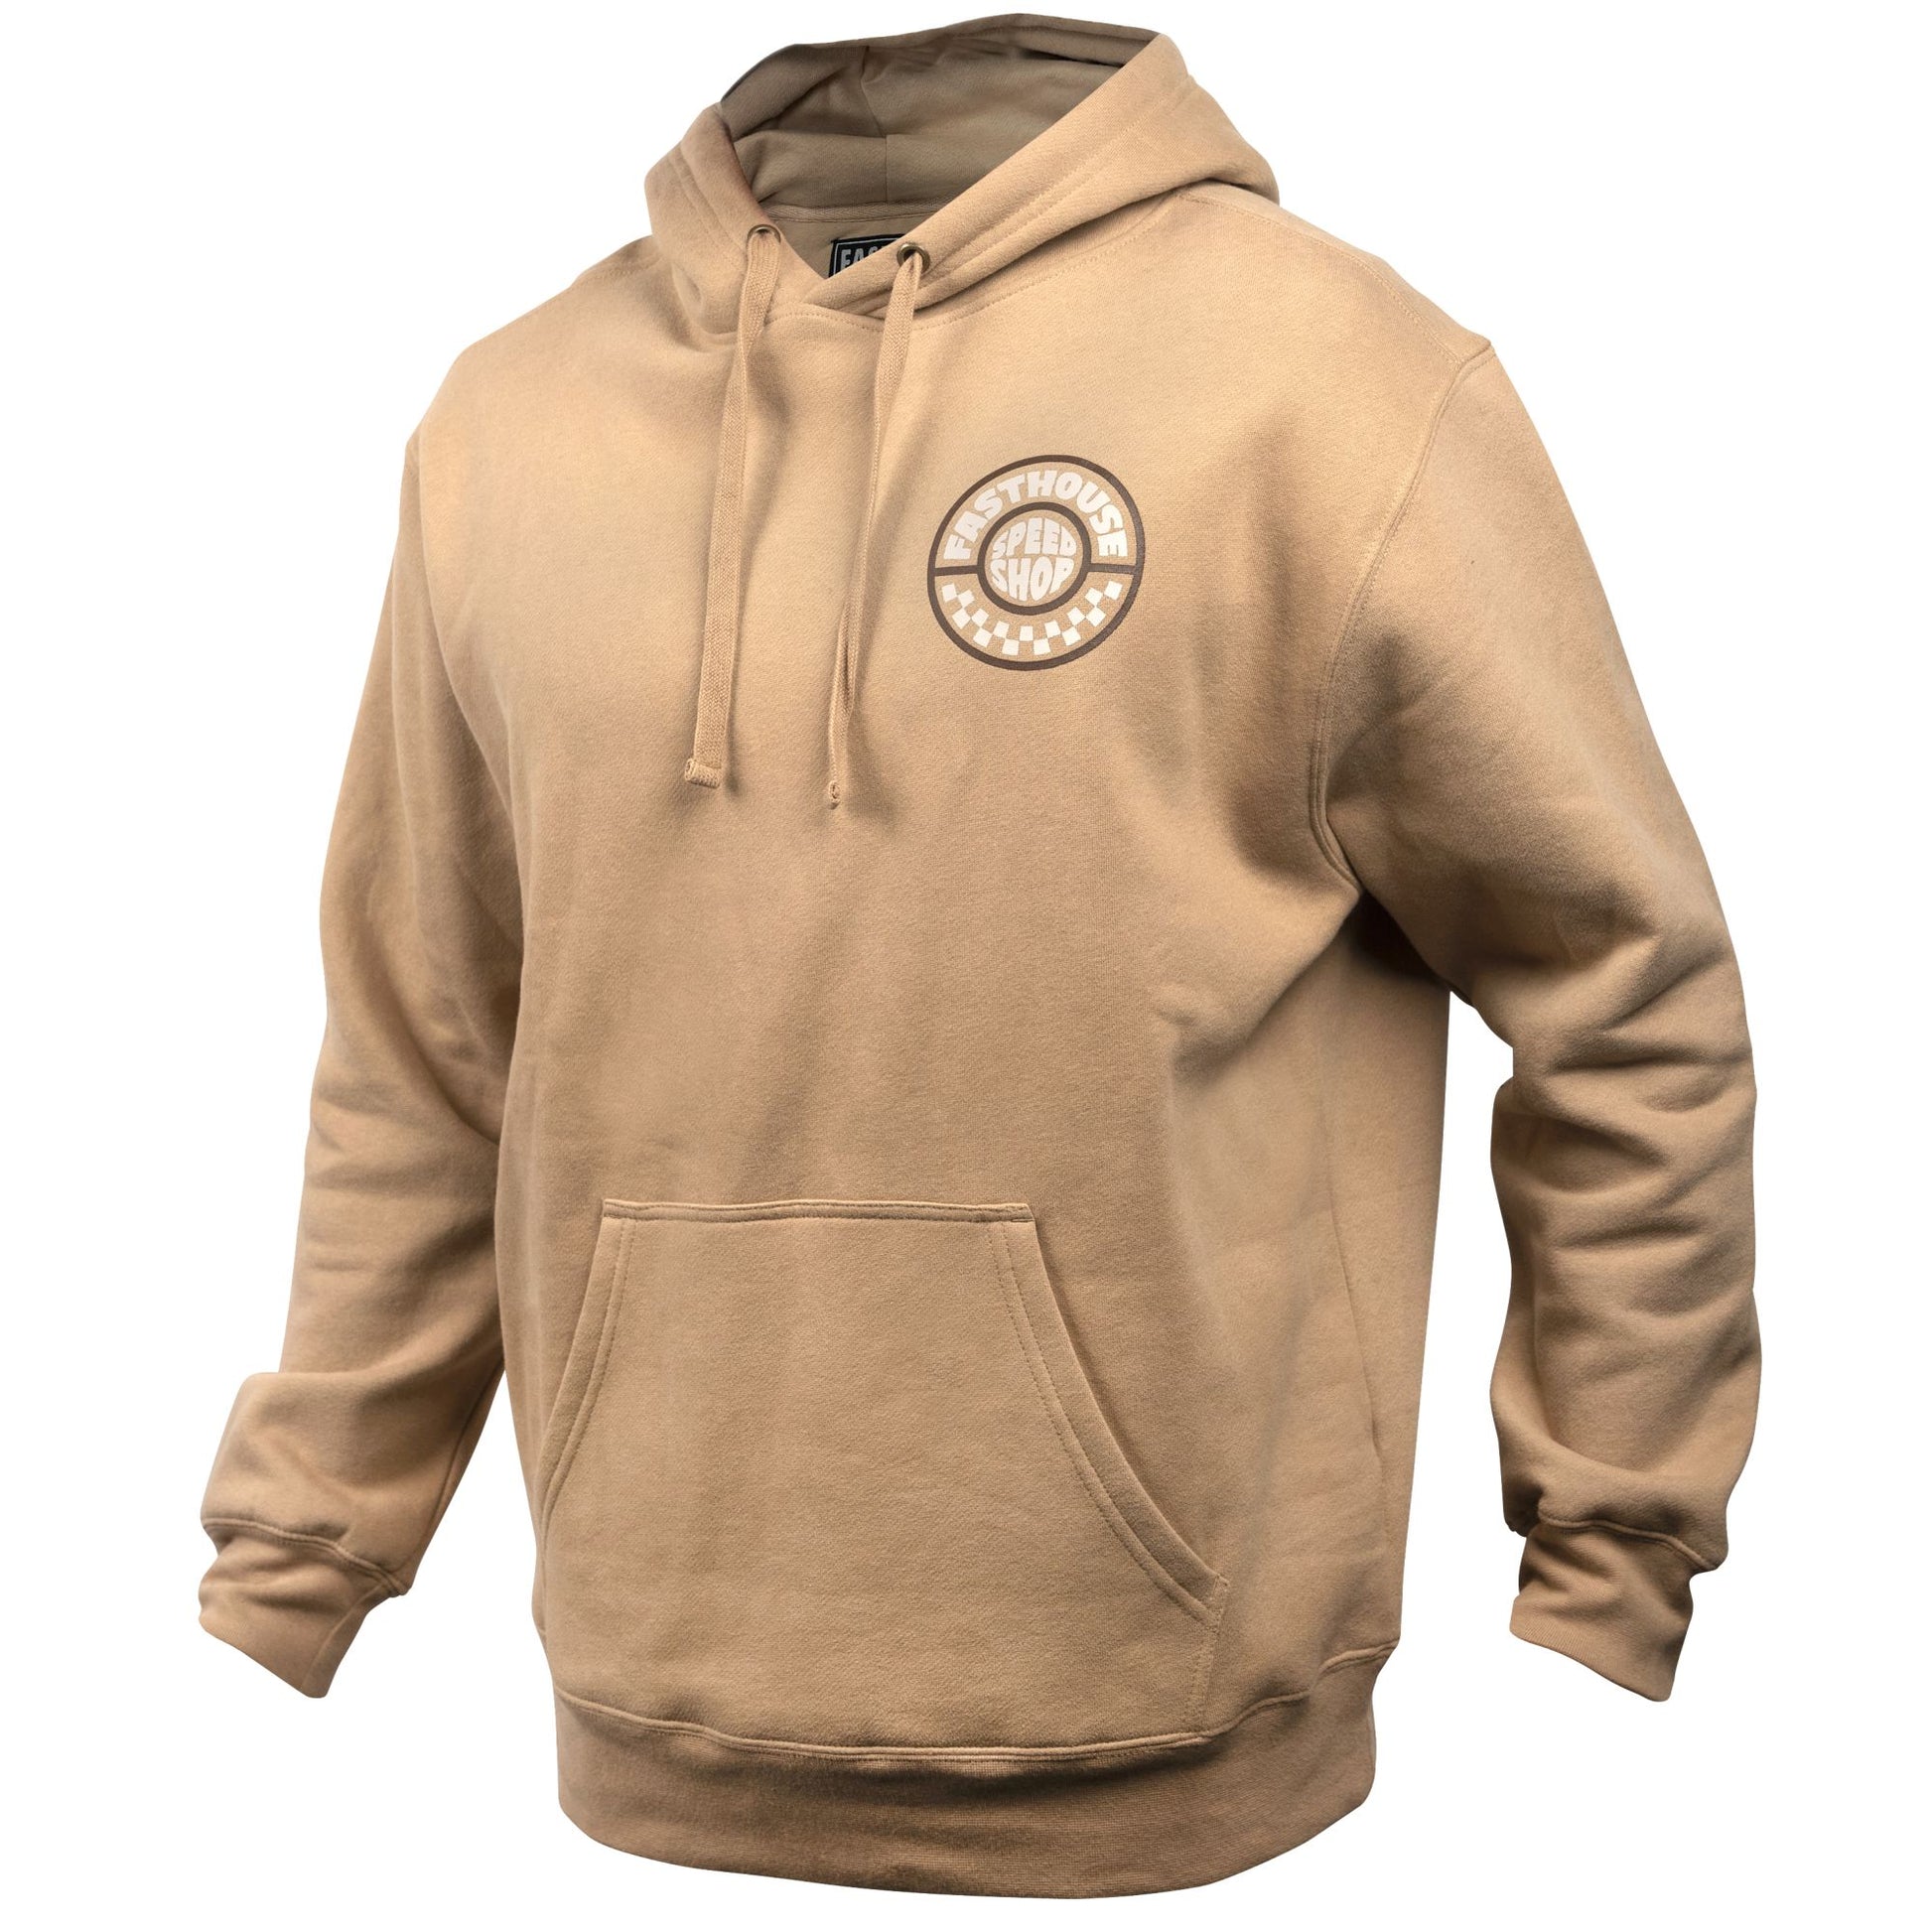 Fasthouse Realm Hooded Pullover Saddle Sweatshirts & Hoodies